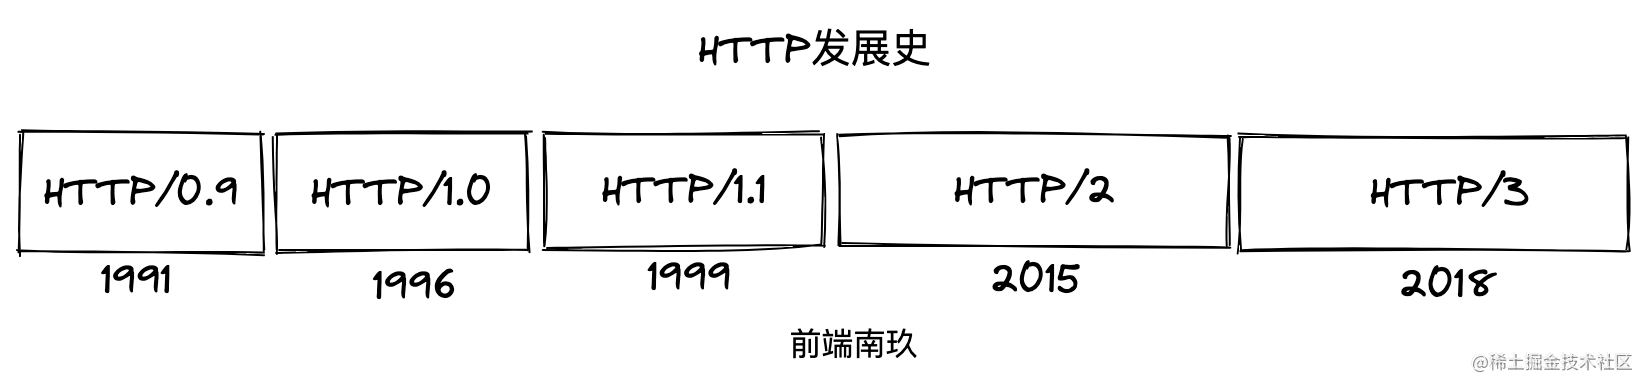 HTTP发展史.png